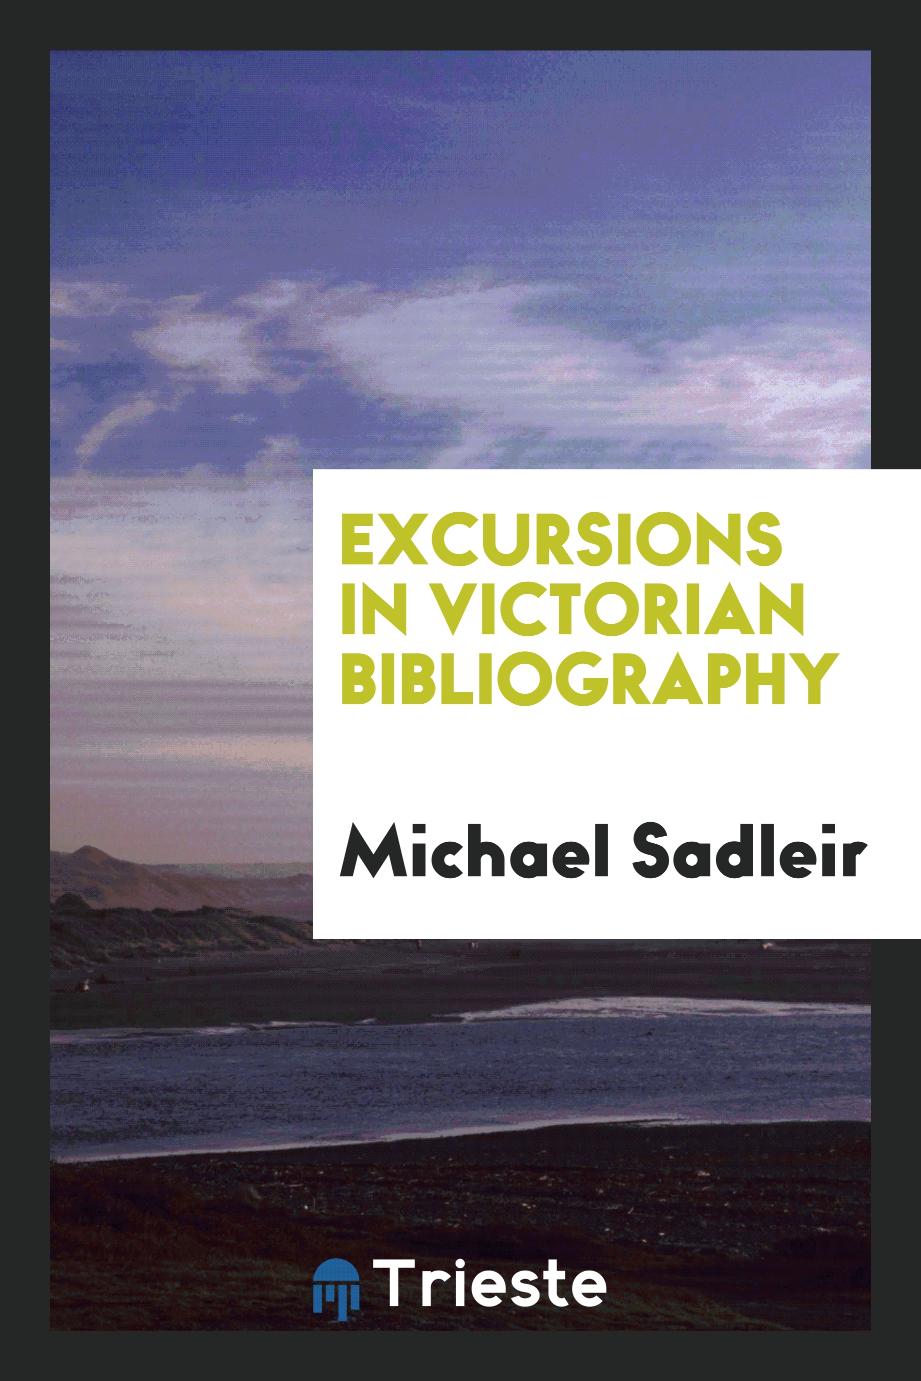 Excursions in Victorian bibliography